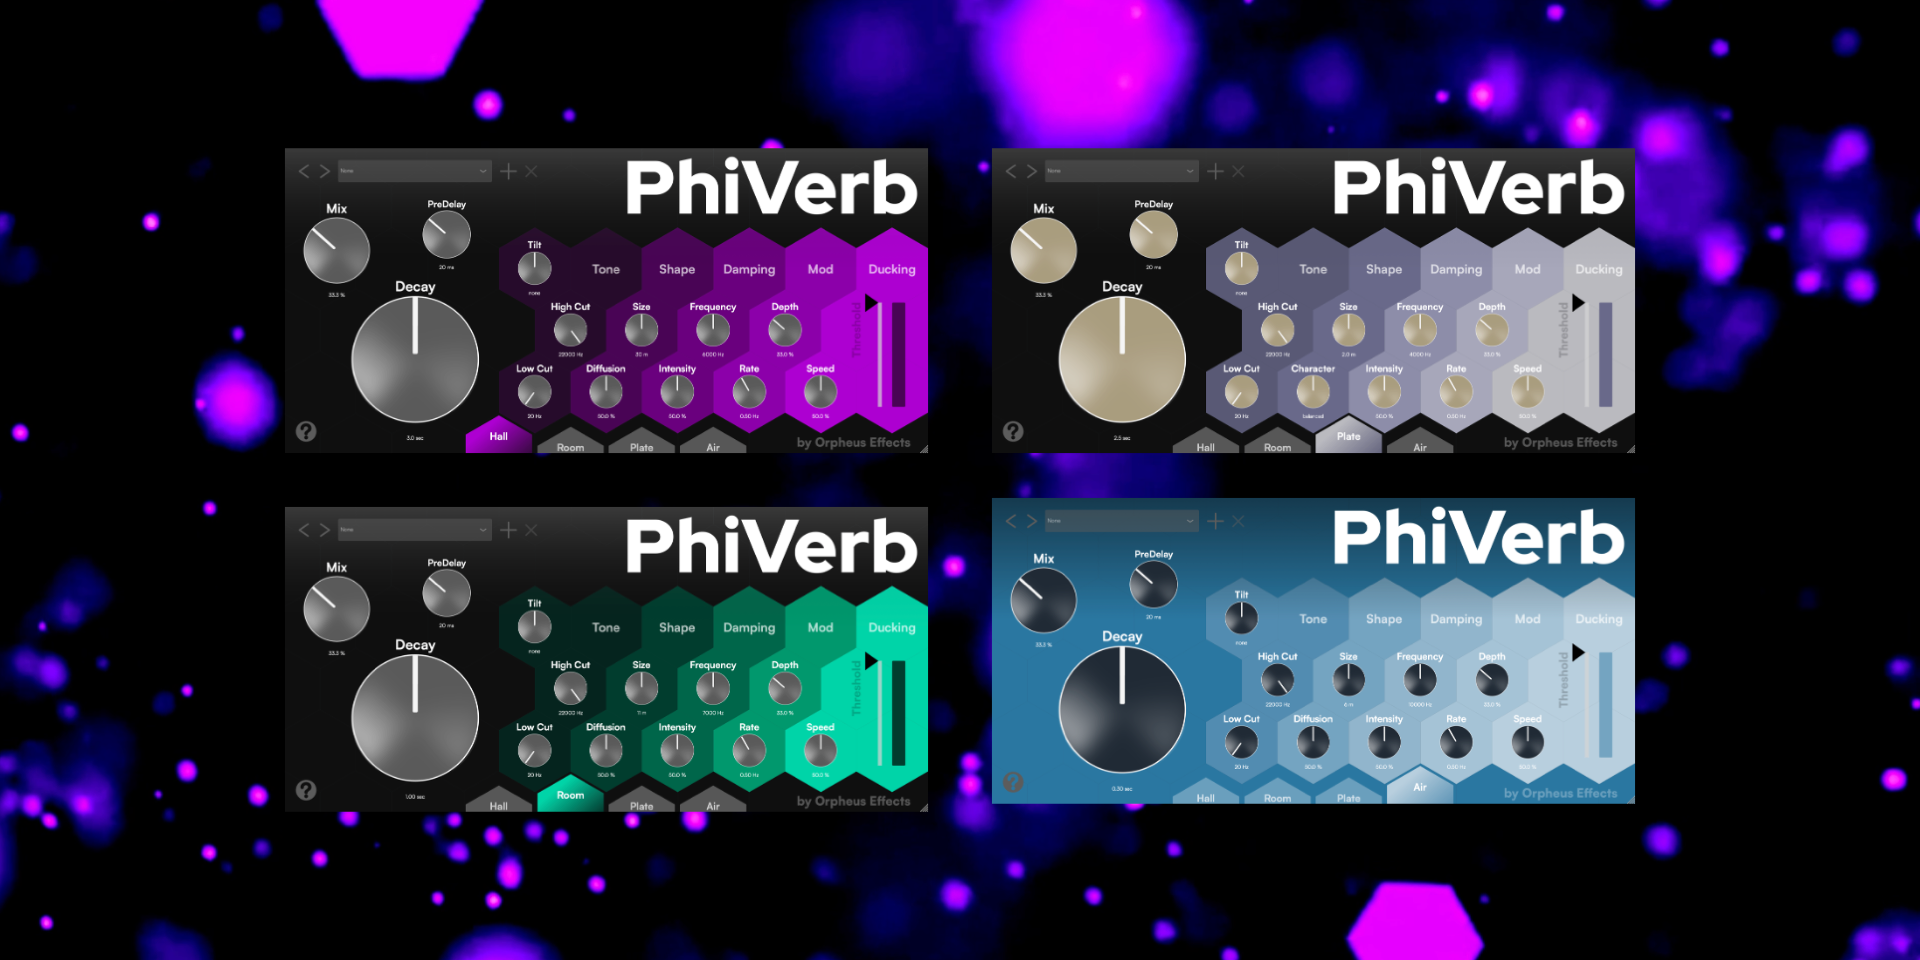 PhiVerb - an Overview